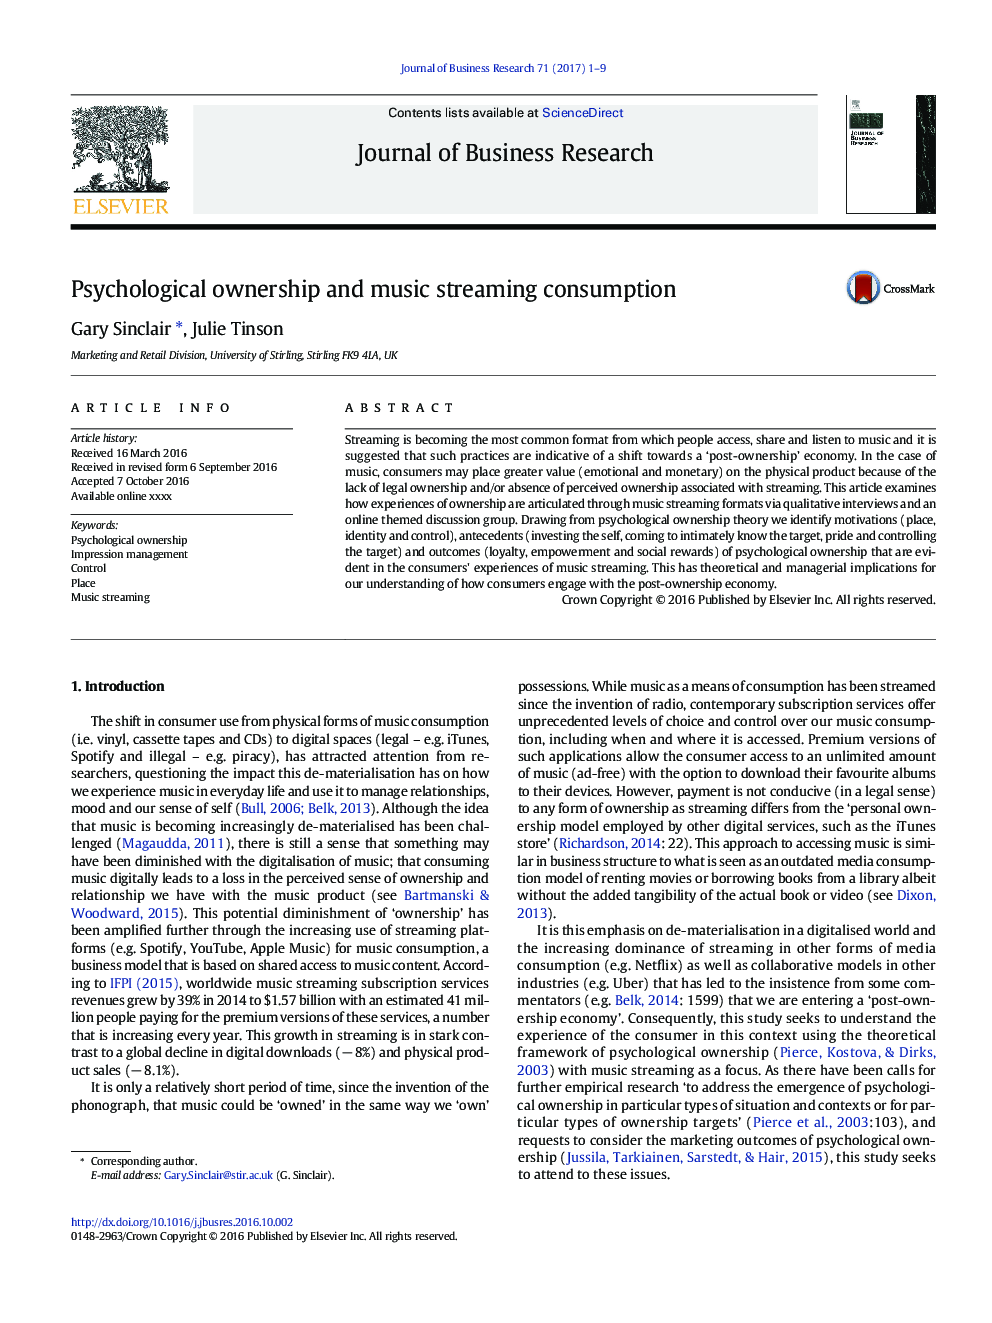 Psychological ownership and music streaming consumption